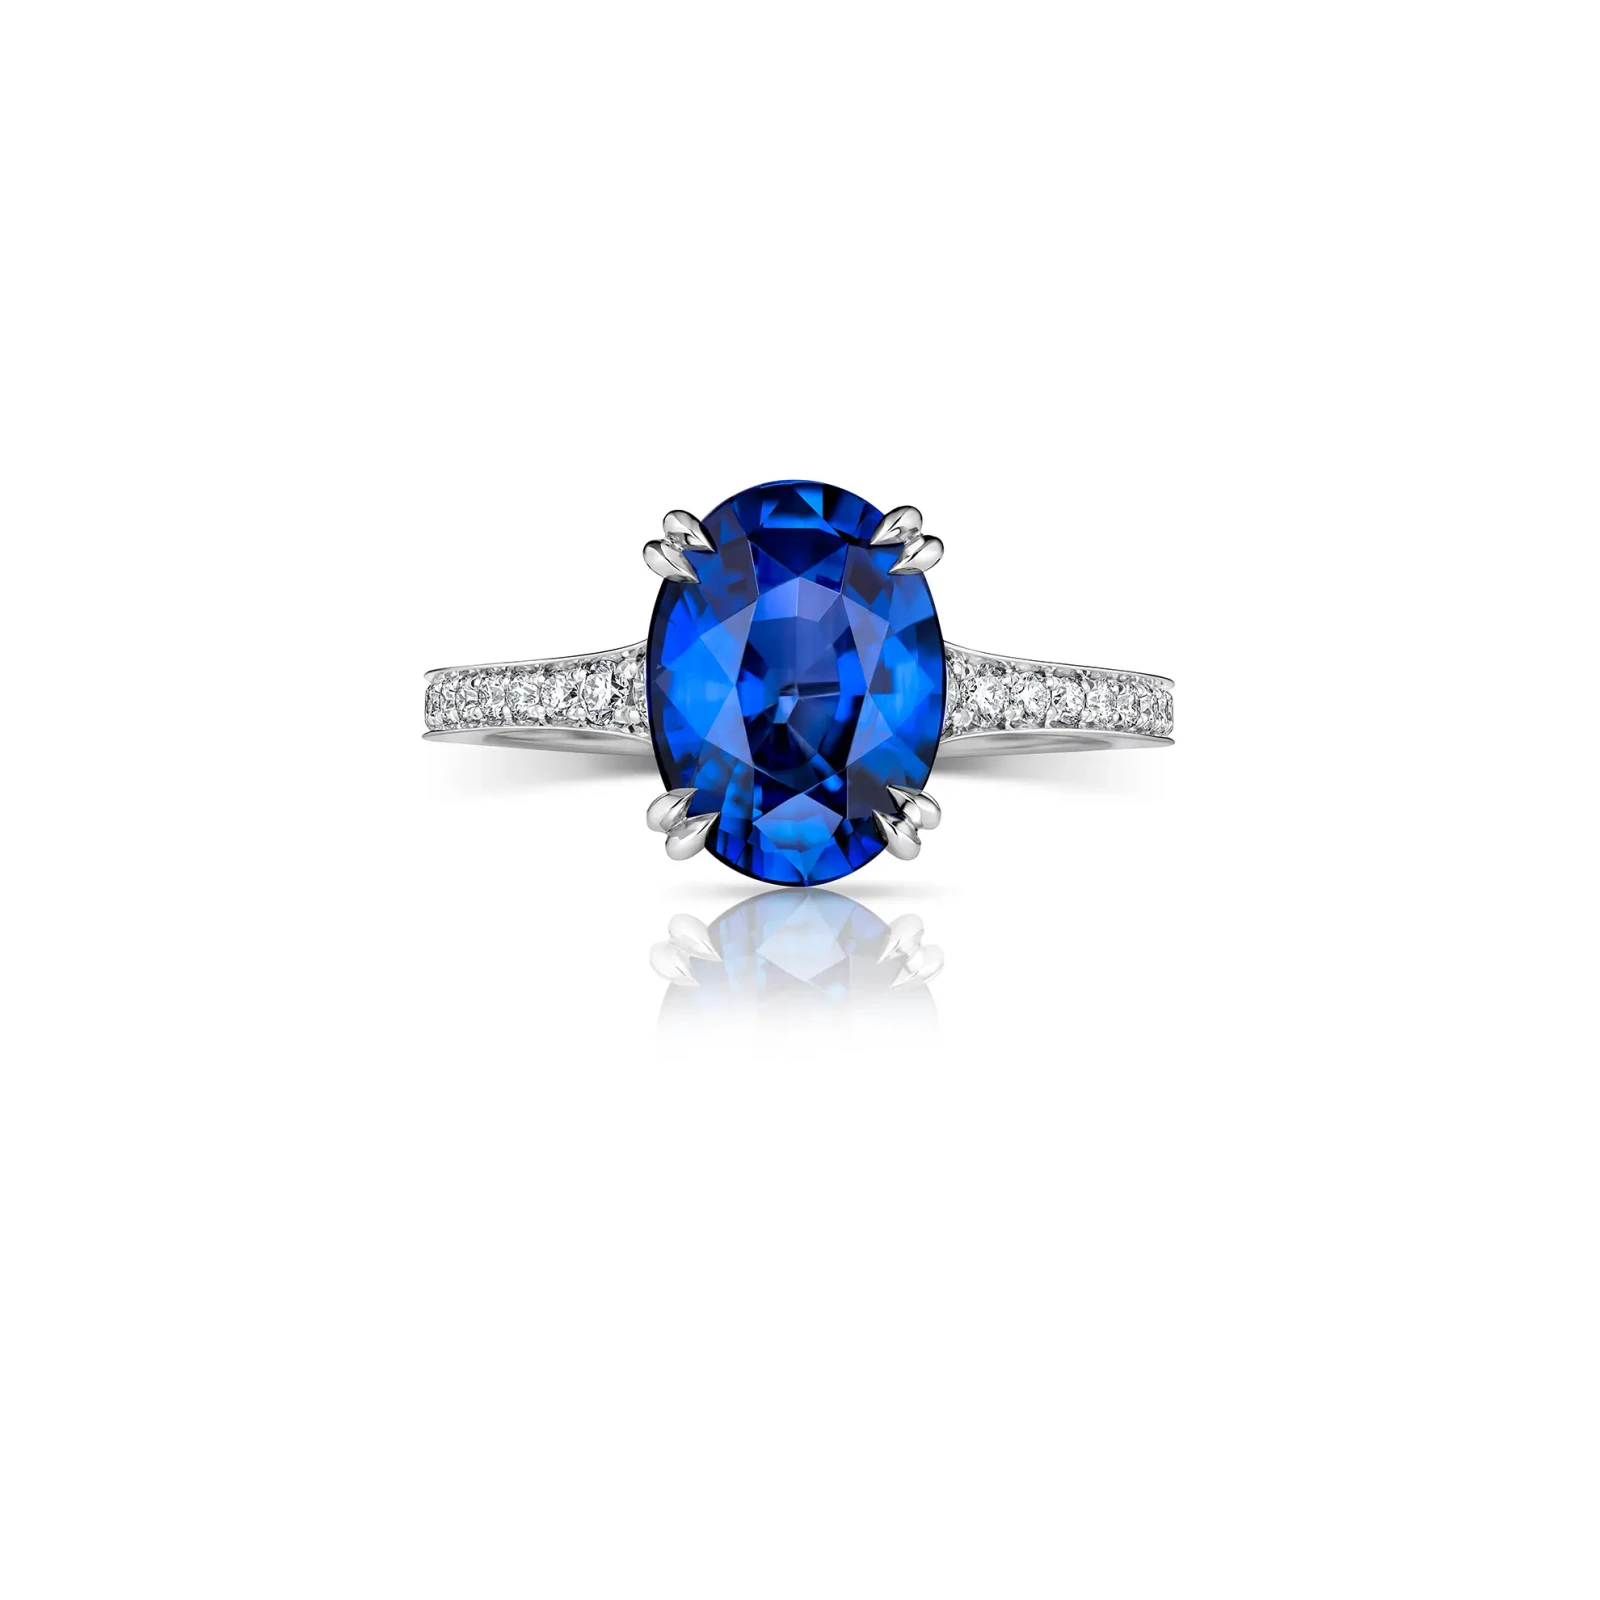 Oval Sapphire Engagement Ring with Diamond Set Shoulders and Bezel